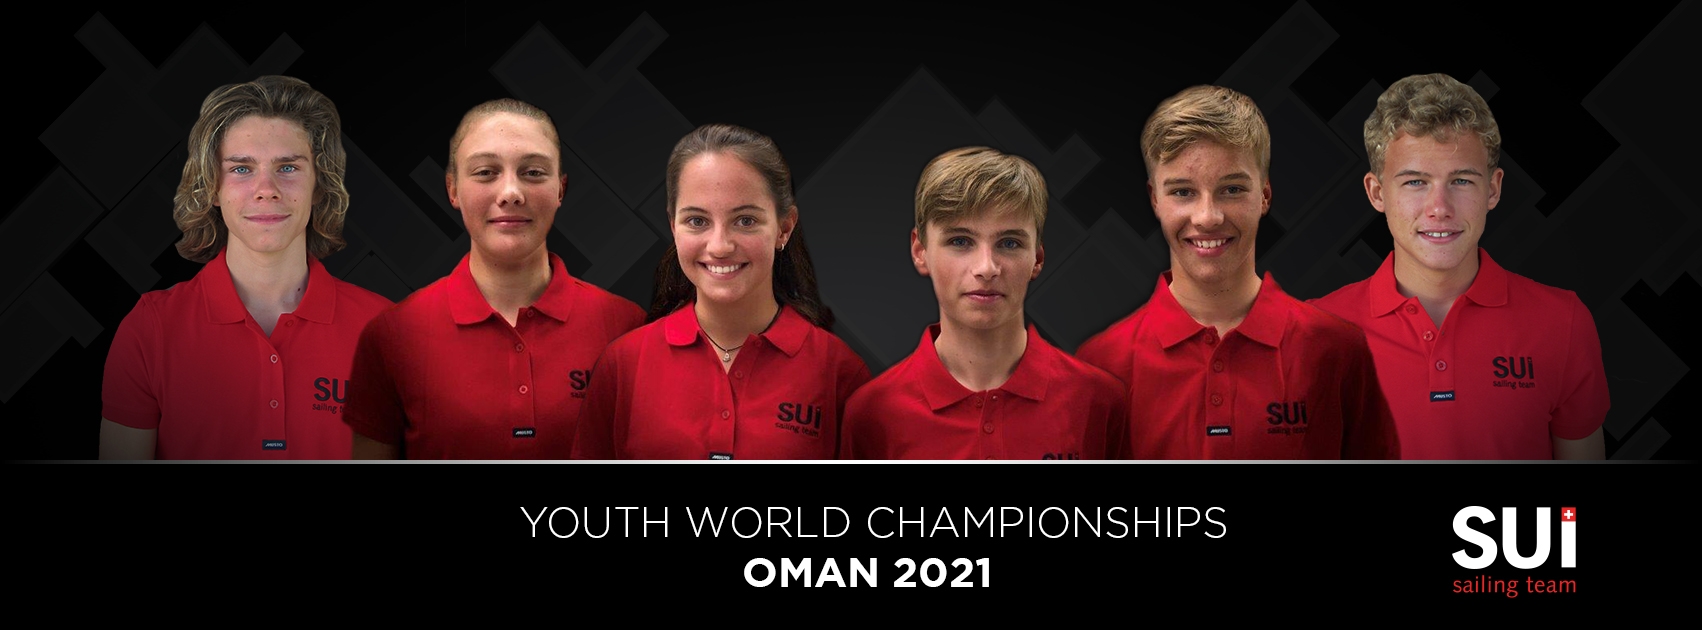  World Sailing Youth World Championship 2021  Al Mussanah OMN  L'equipe Suisse selectionne